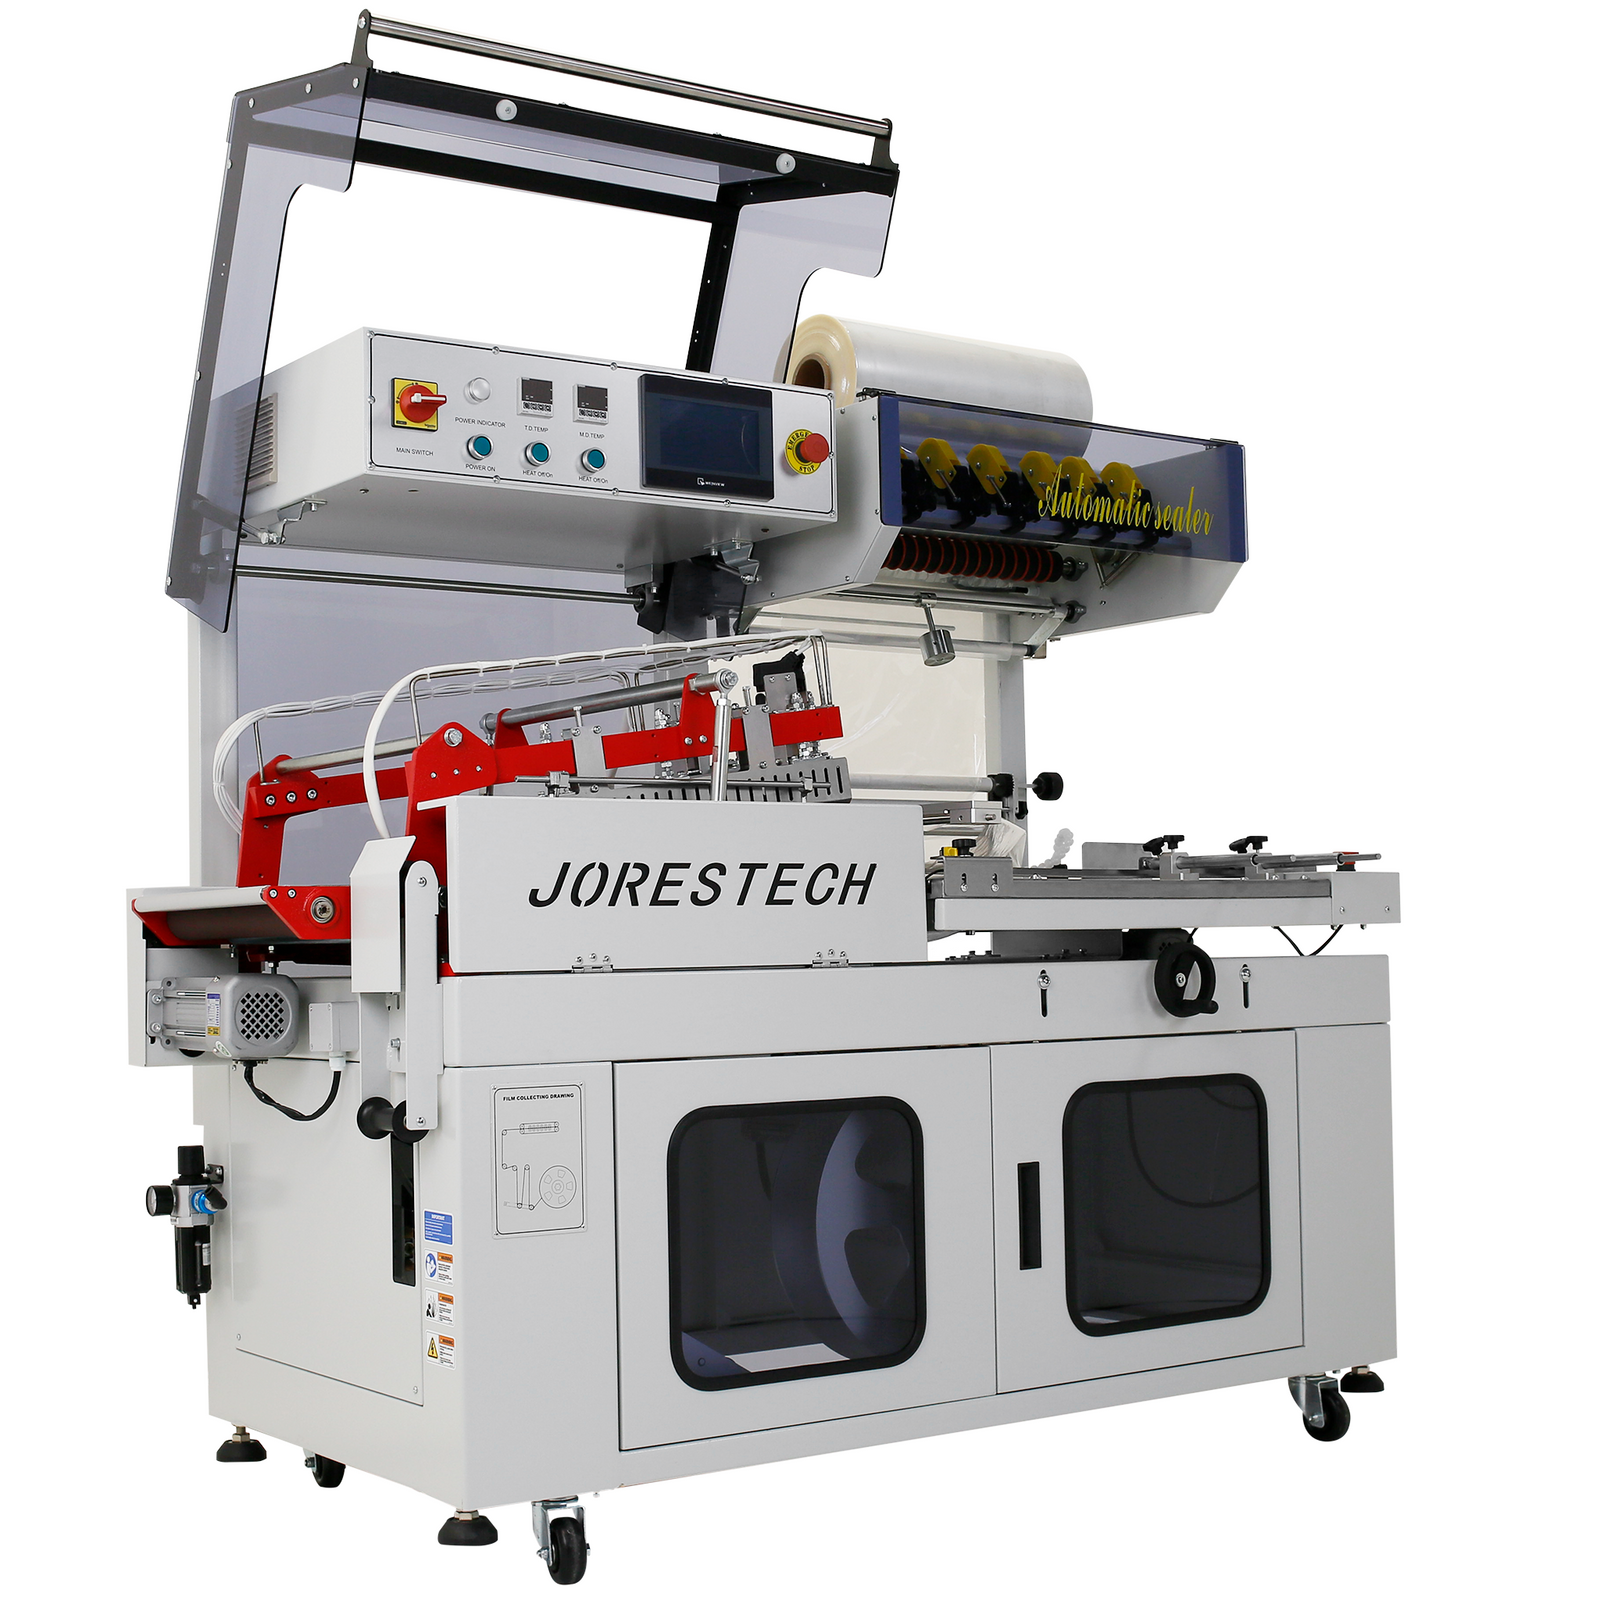  JORES TECHNOLOGIES® automatic L Bar Film Sealer.  Shrink film Sealer has the lid of the sealing chamber open to show the red L bar sealing mechanism. Machine has a roll of clear shrink film positioned on the dispenser.